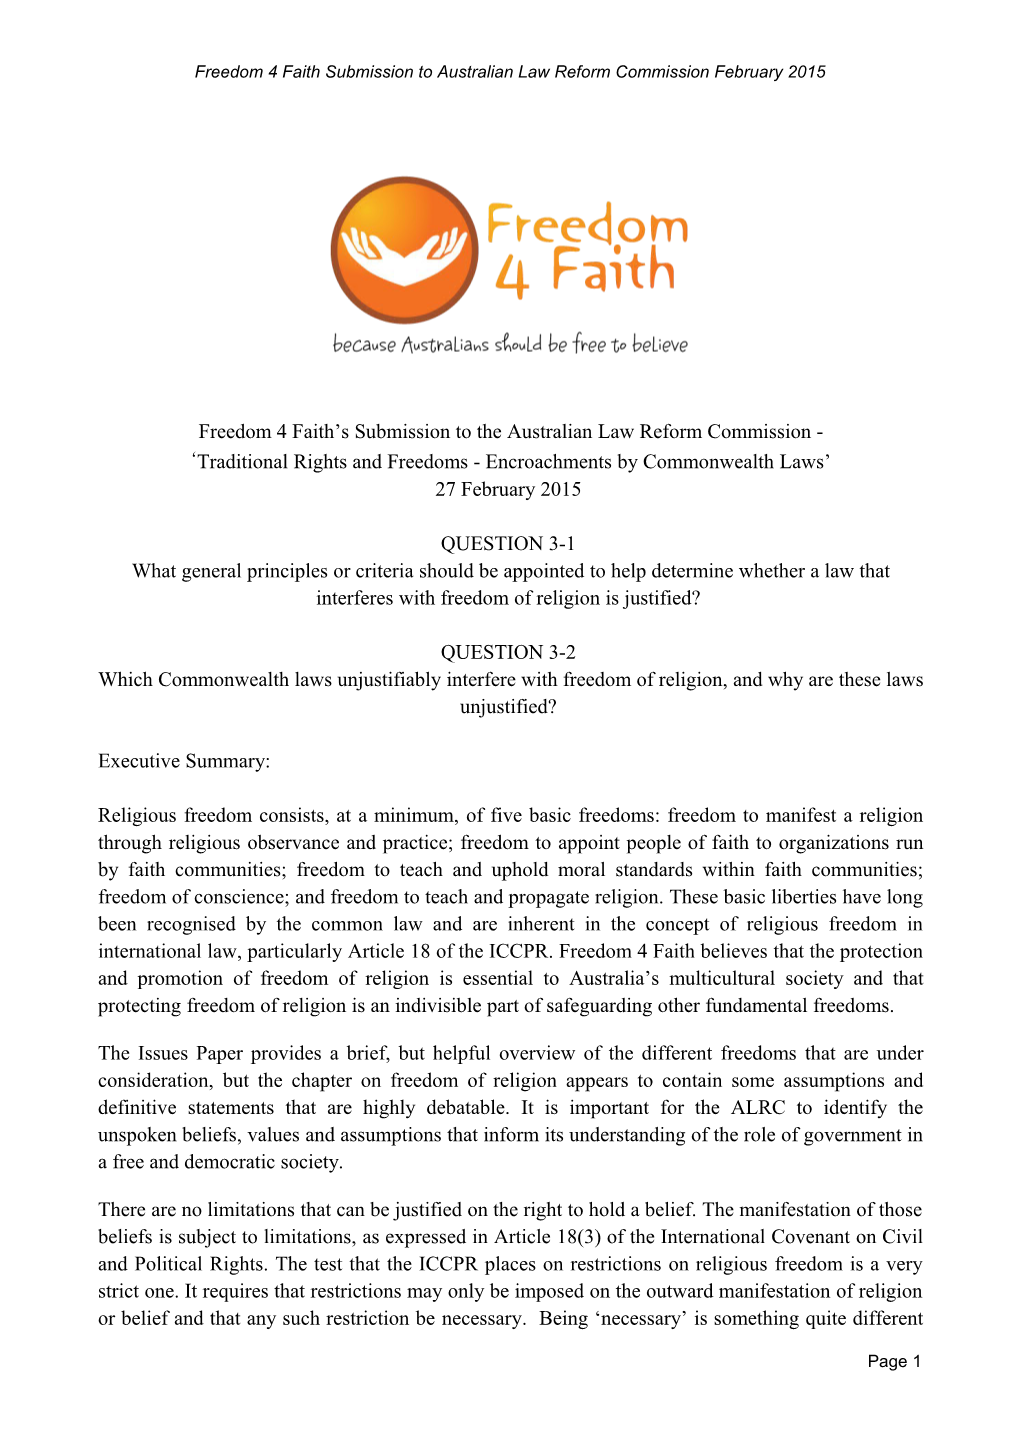 Freedom 4 Faith S Submission to the Australian Law Reform Commission